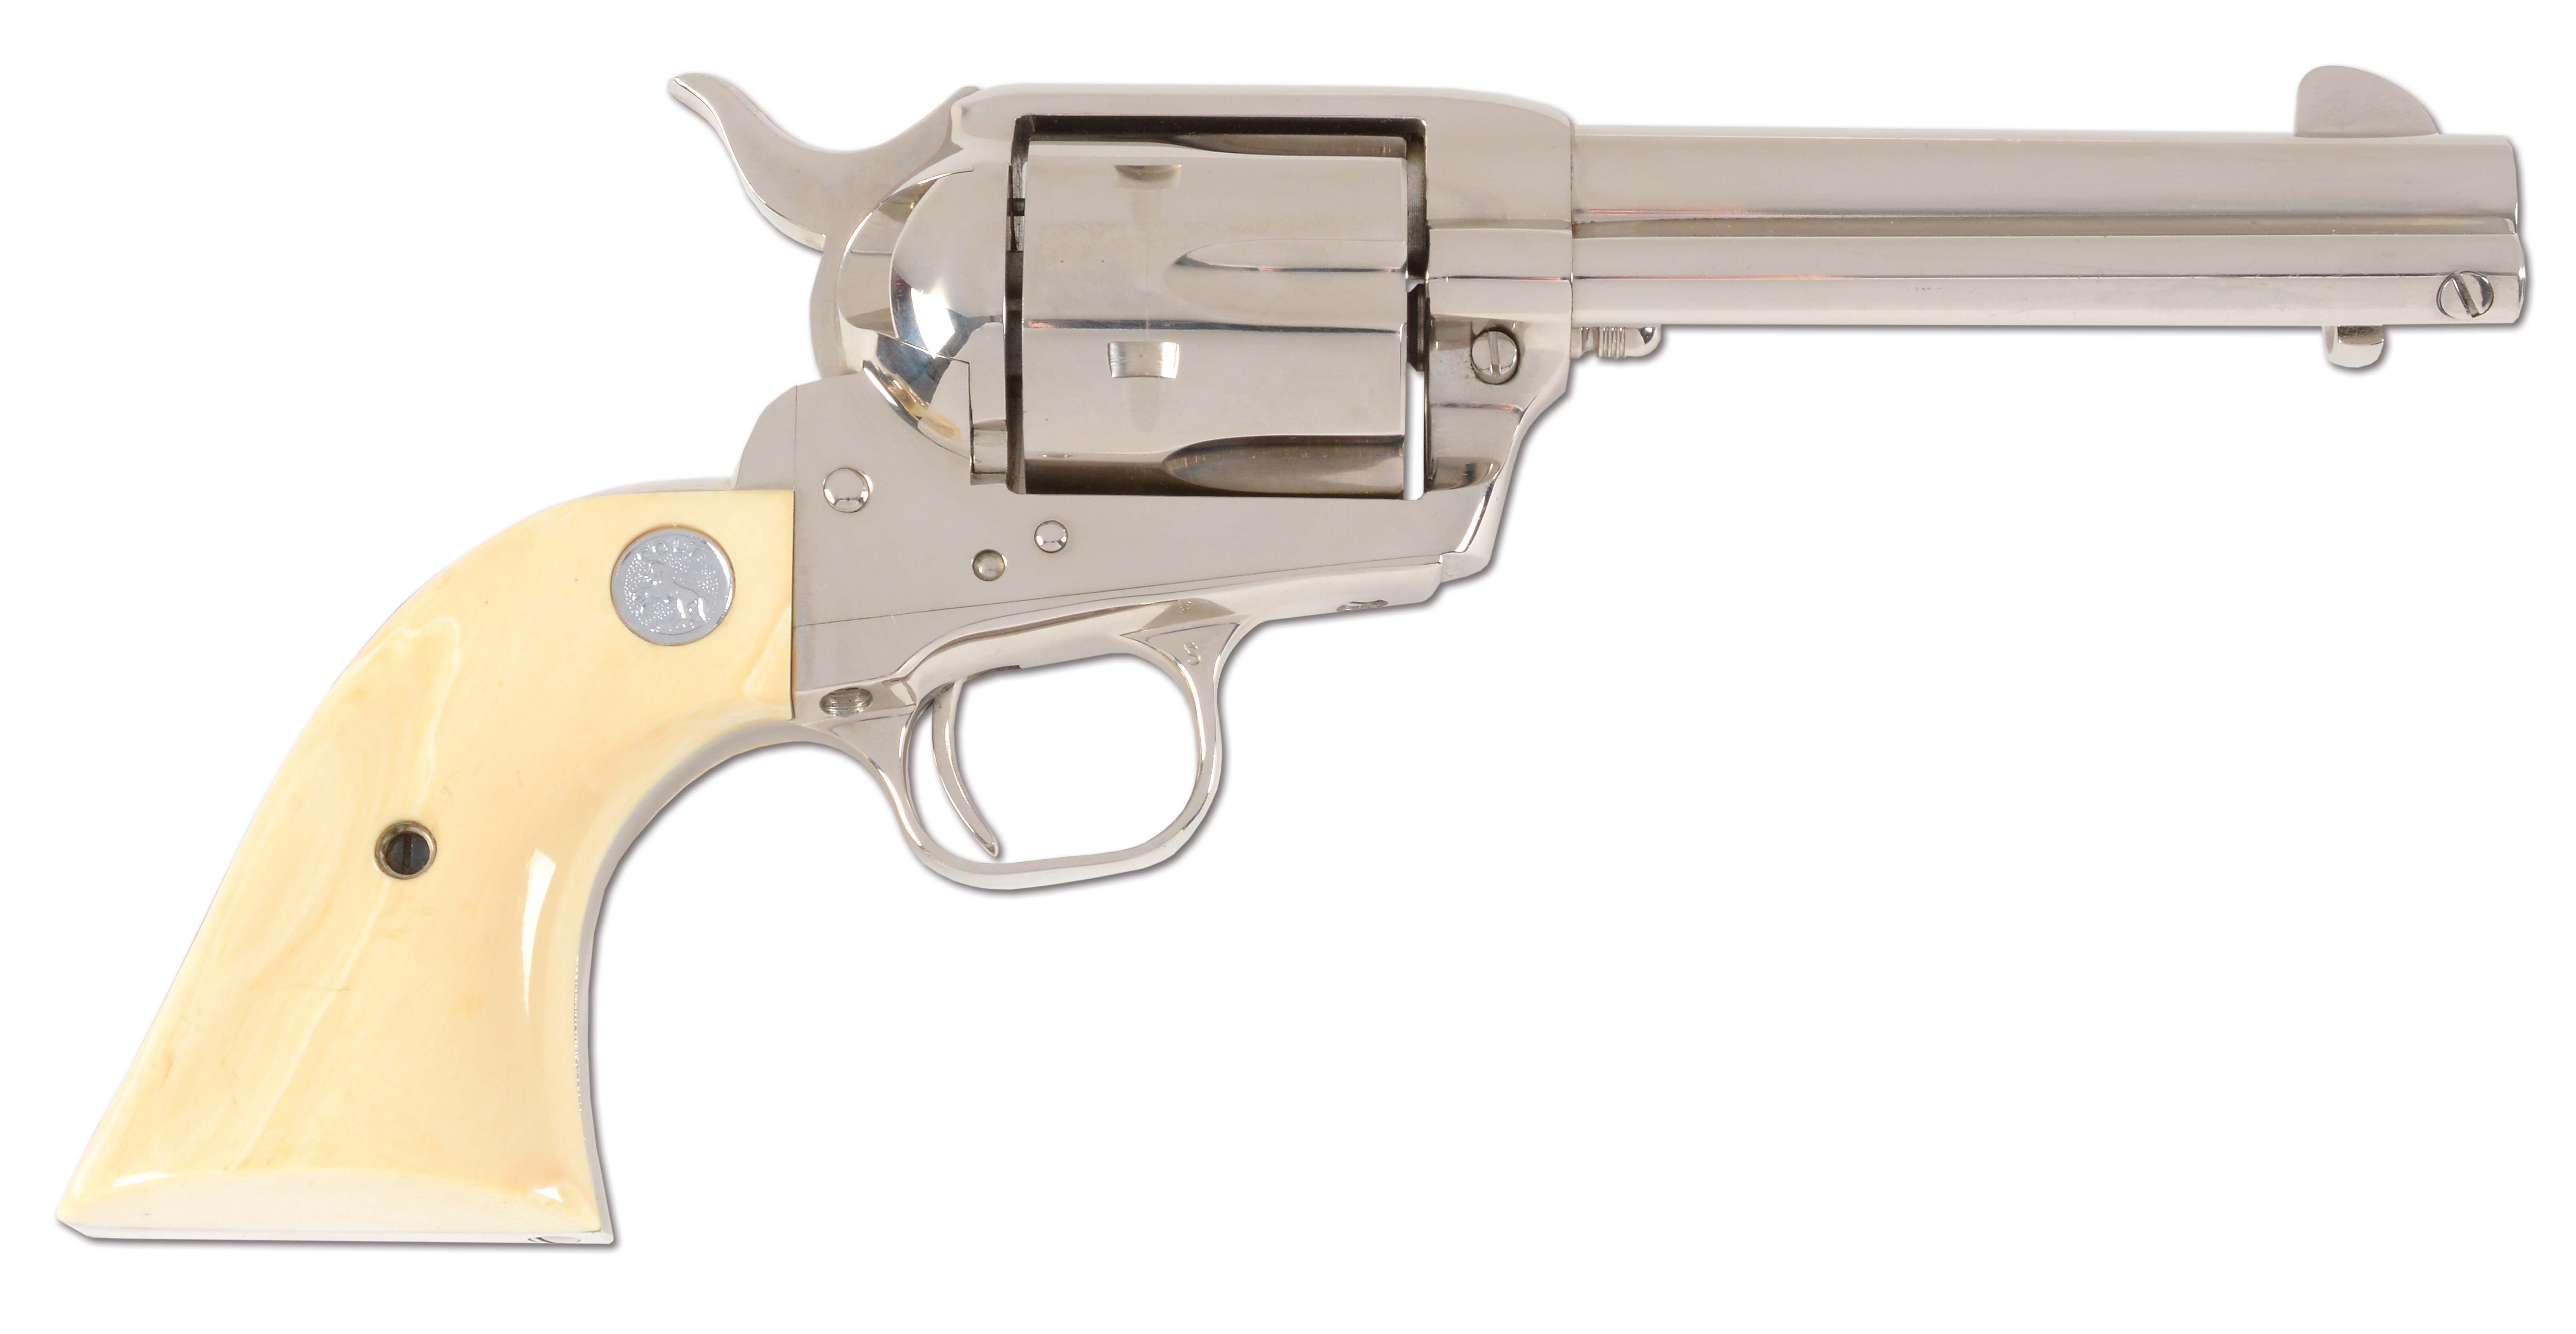 M) COLT SINGLE ACTION ARMY .45 ACP REVOLVER WITH CASE - auctions  price  archive